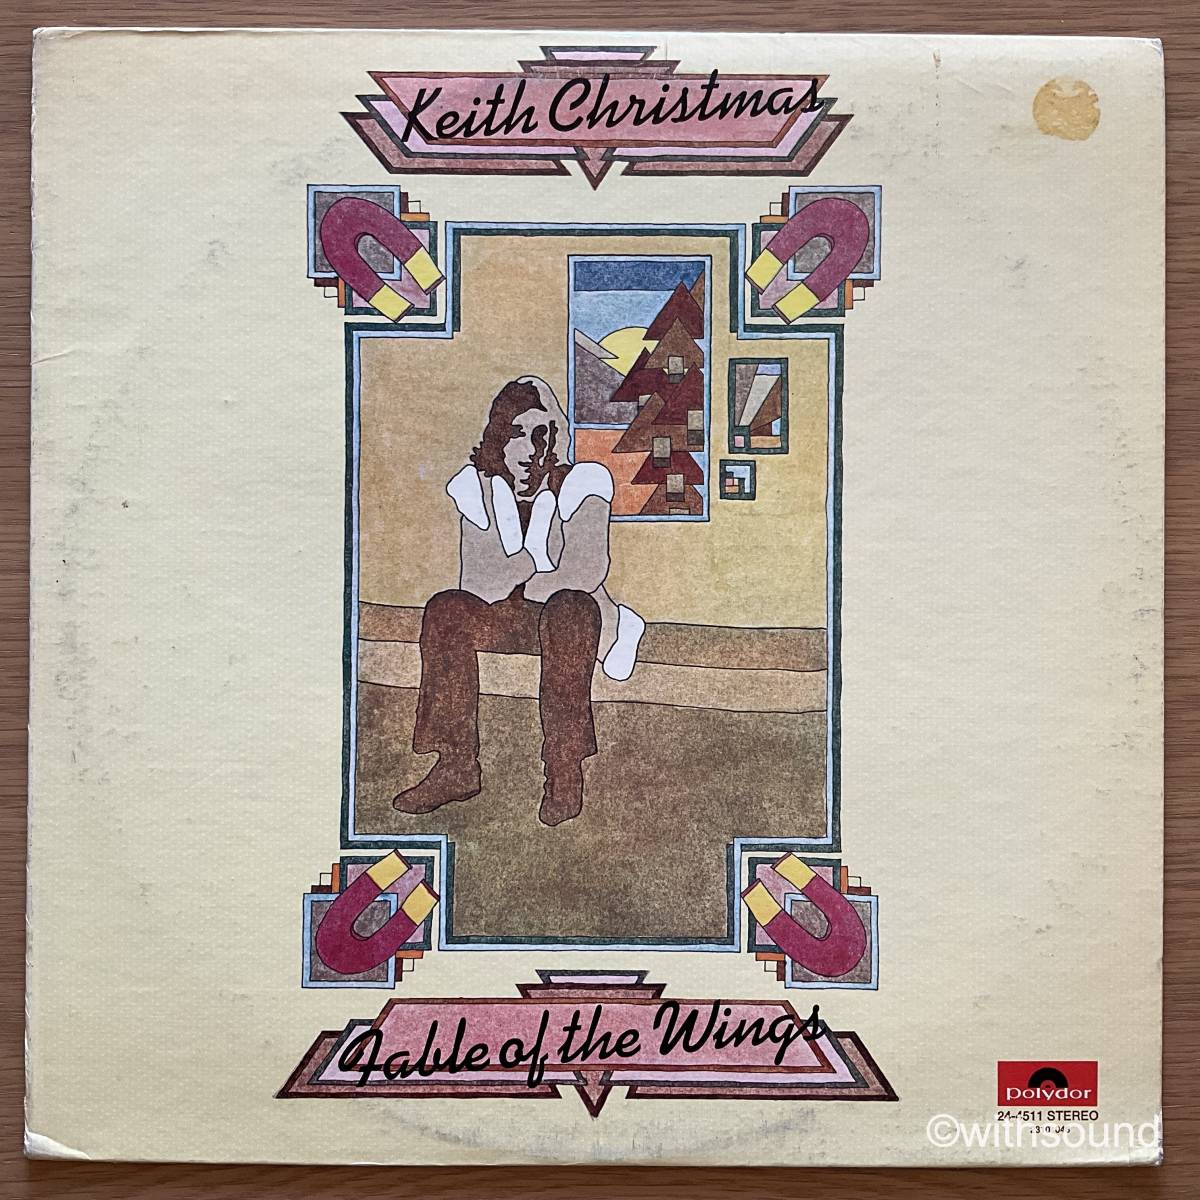 KEITH CHRISTMAS Fable Of The Wings US LP 1970 POLYDOR 24-4511_画像1